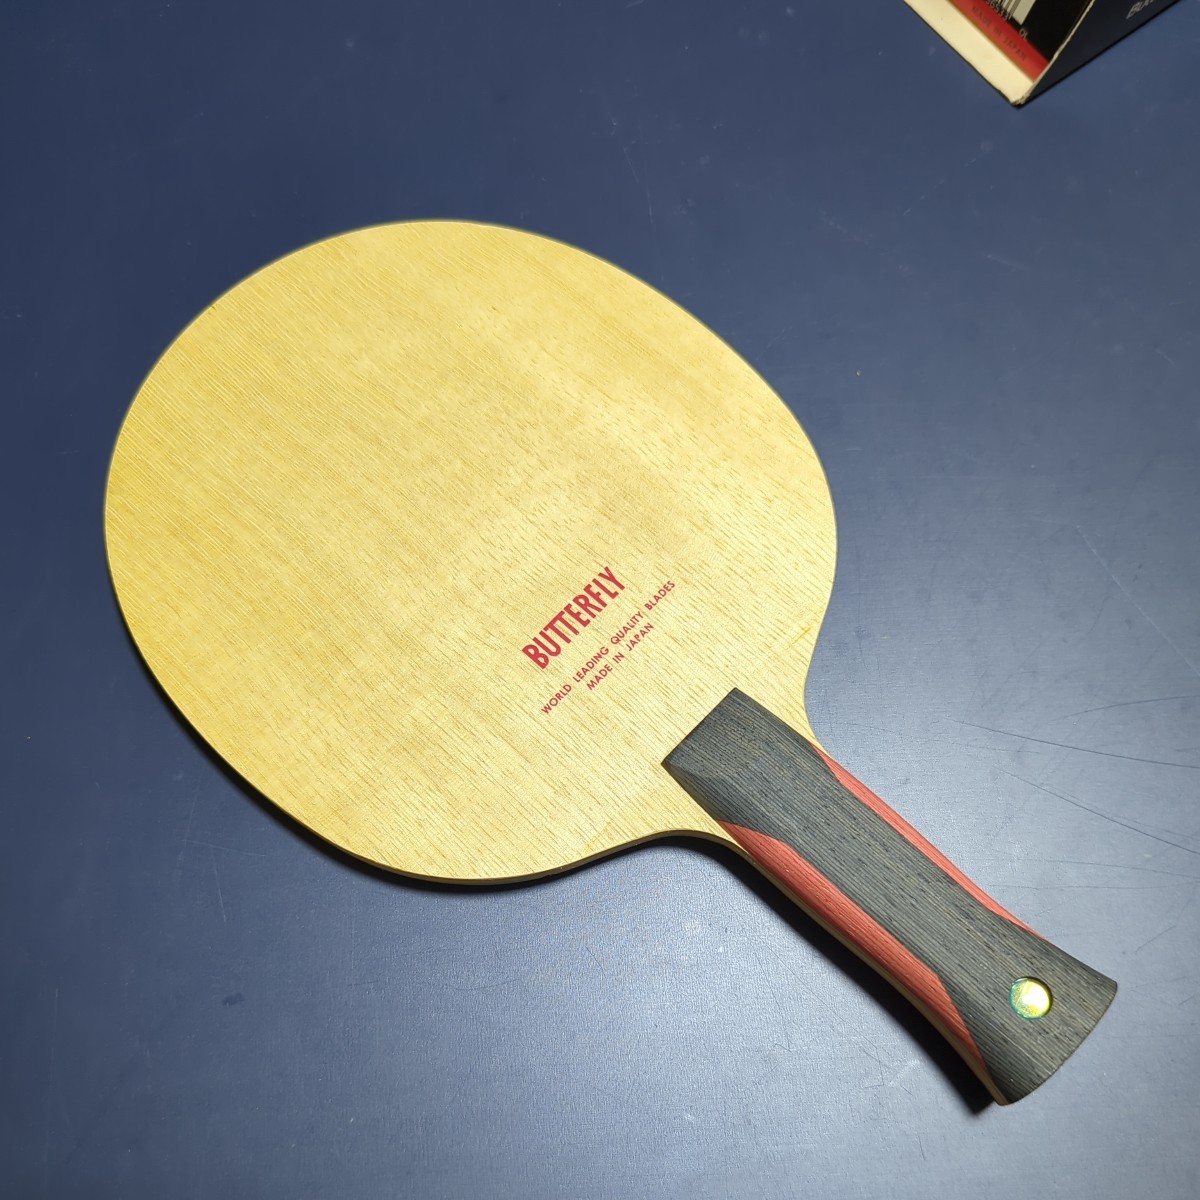  ping-pong racket . poetry zlf inner force records out of production almost new goods butterfly